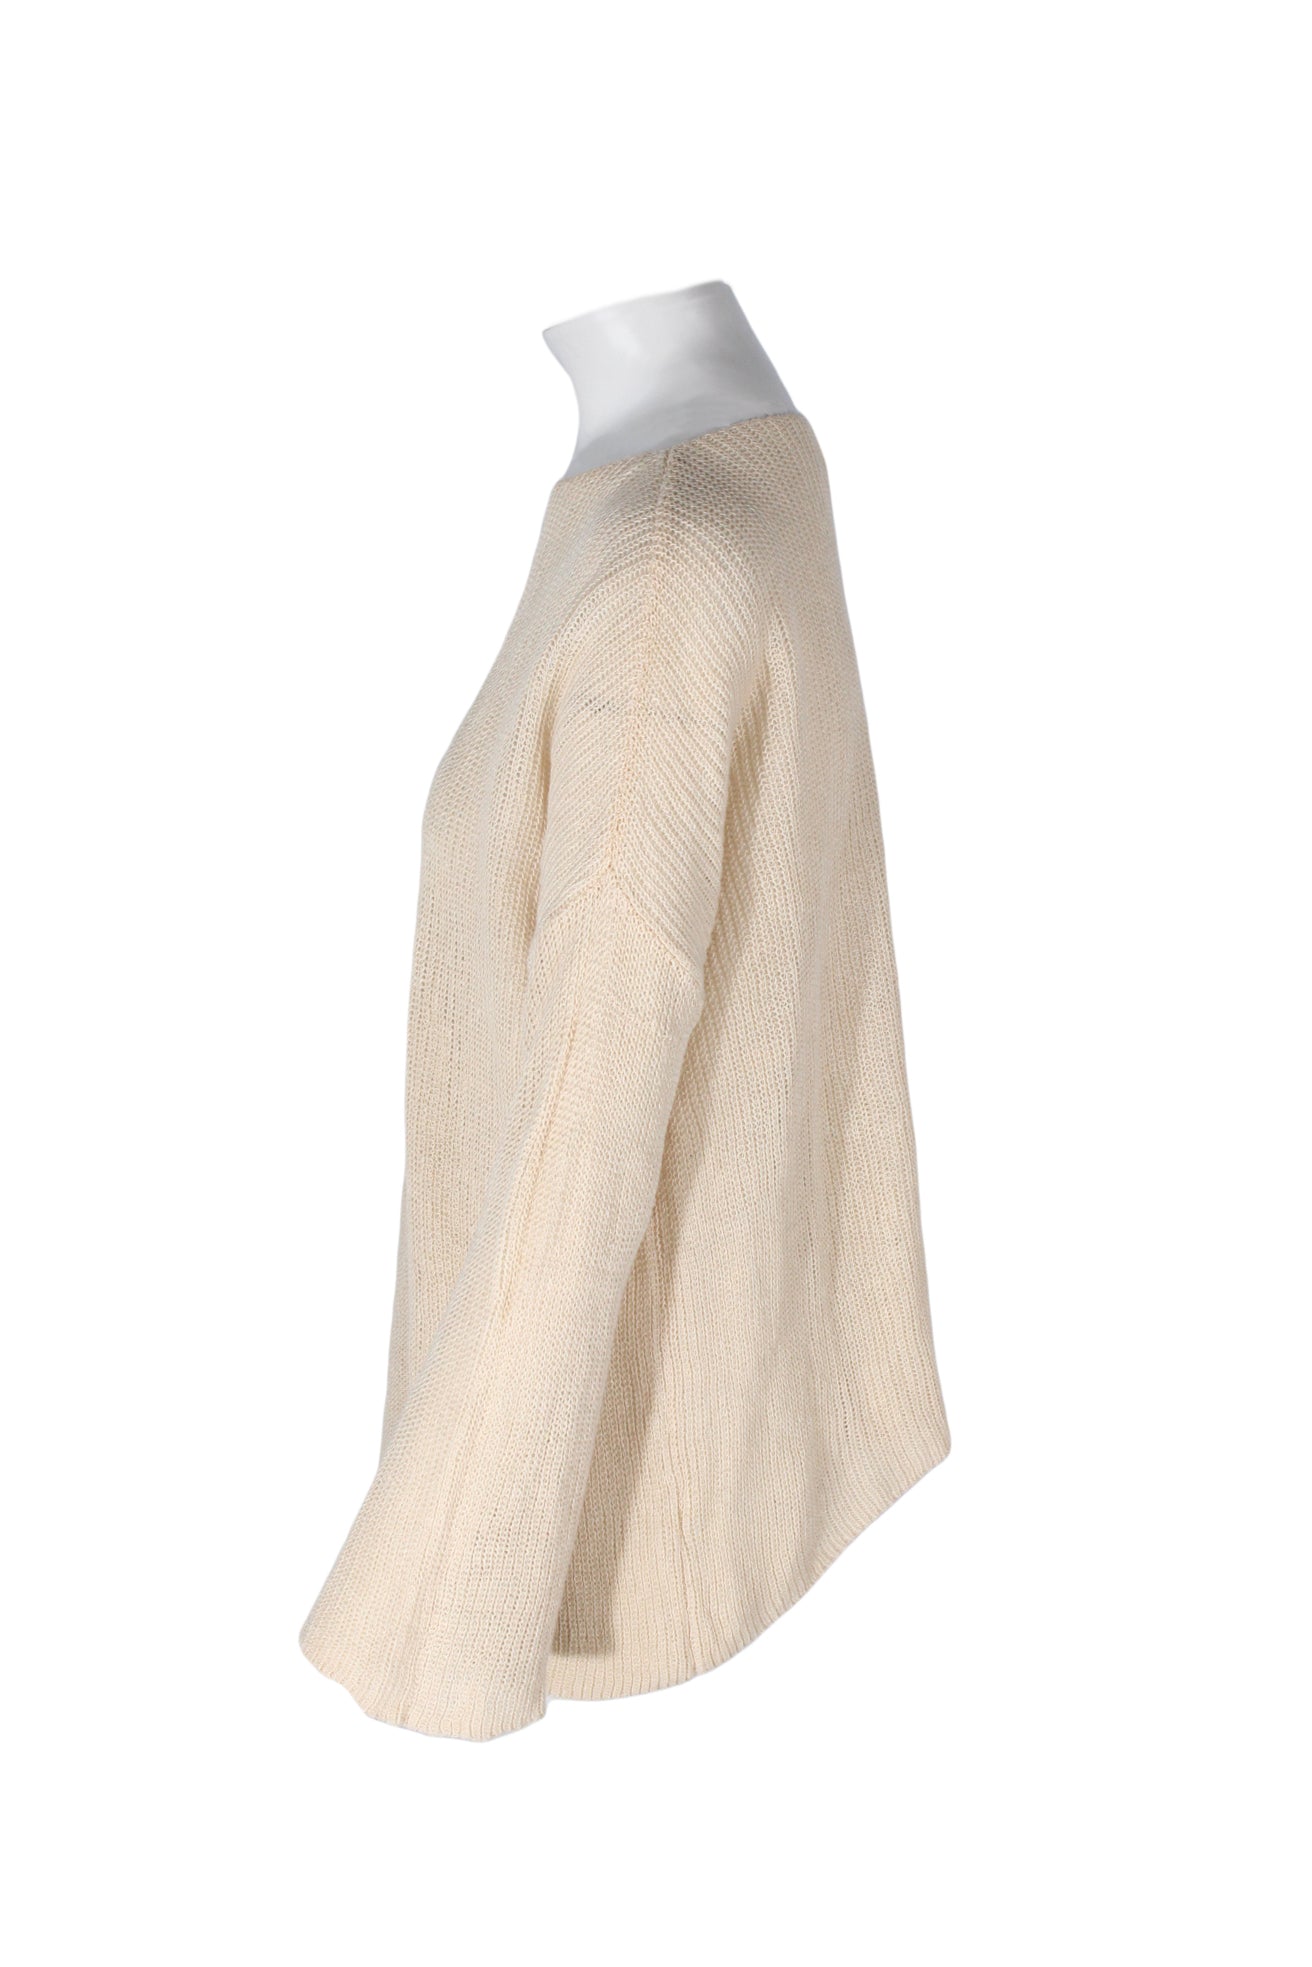 side angle demylee new york beige sweater on feminine mannequin torso featuring dropped, slightly flared sleeves.